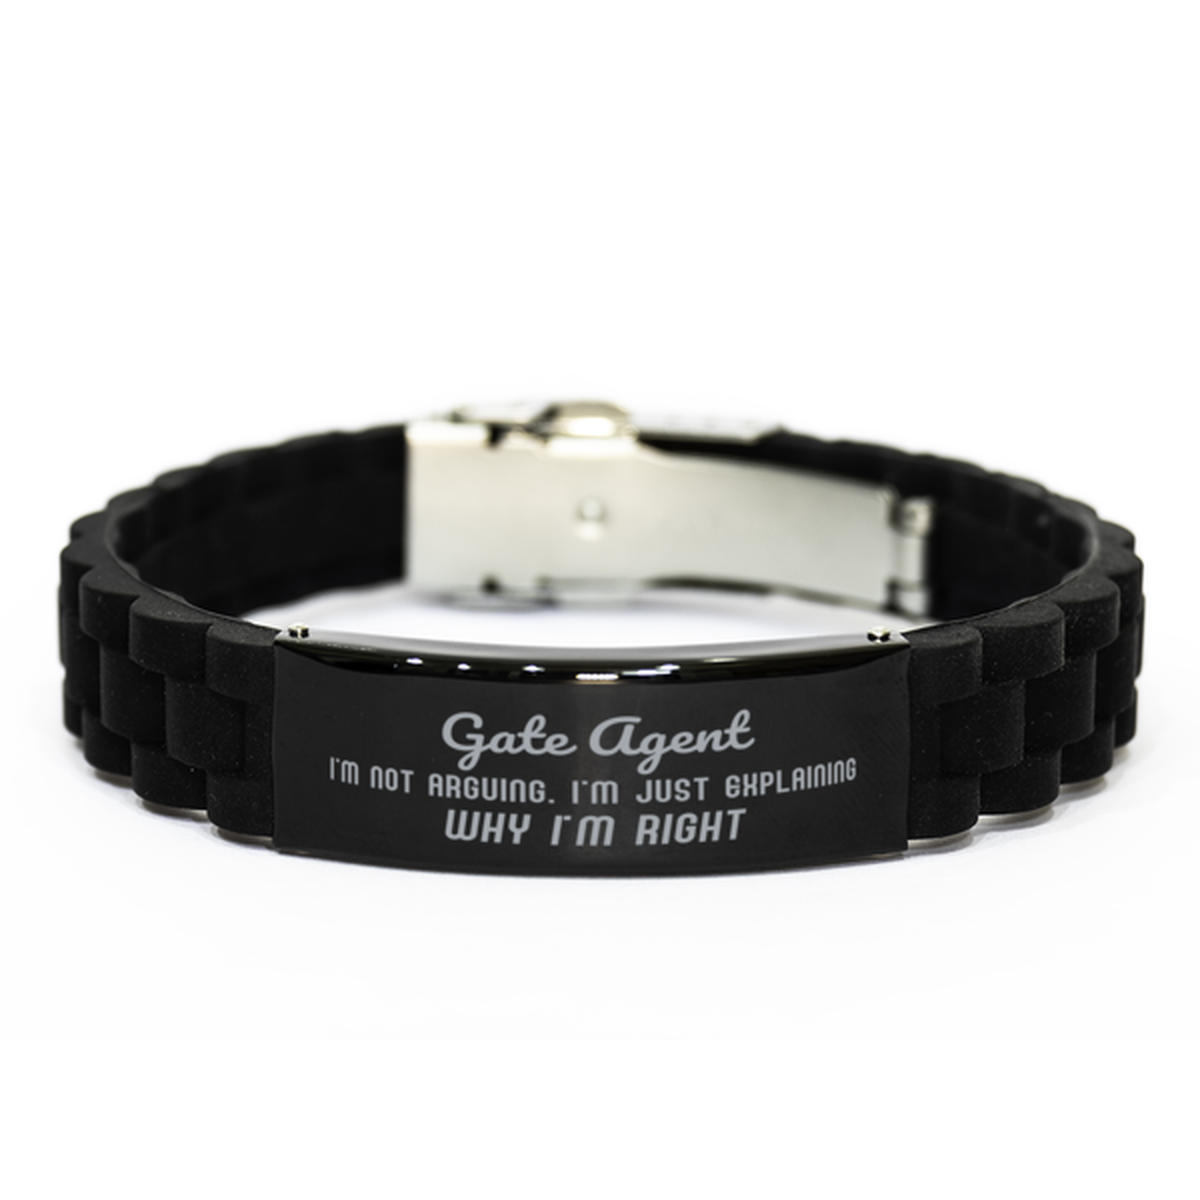 Gate Agent I'm not Arguing. I'm Just Explaining Why I'm RIGHT Black Glidelock Clasp Bracelet, Funny Saying Quote Gate Agent Gifts For Gate Agent Graduation Birthday Christmas Gifts for Men Women Coworker